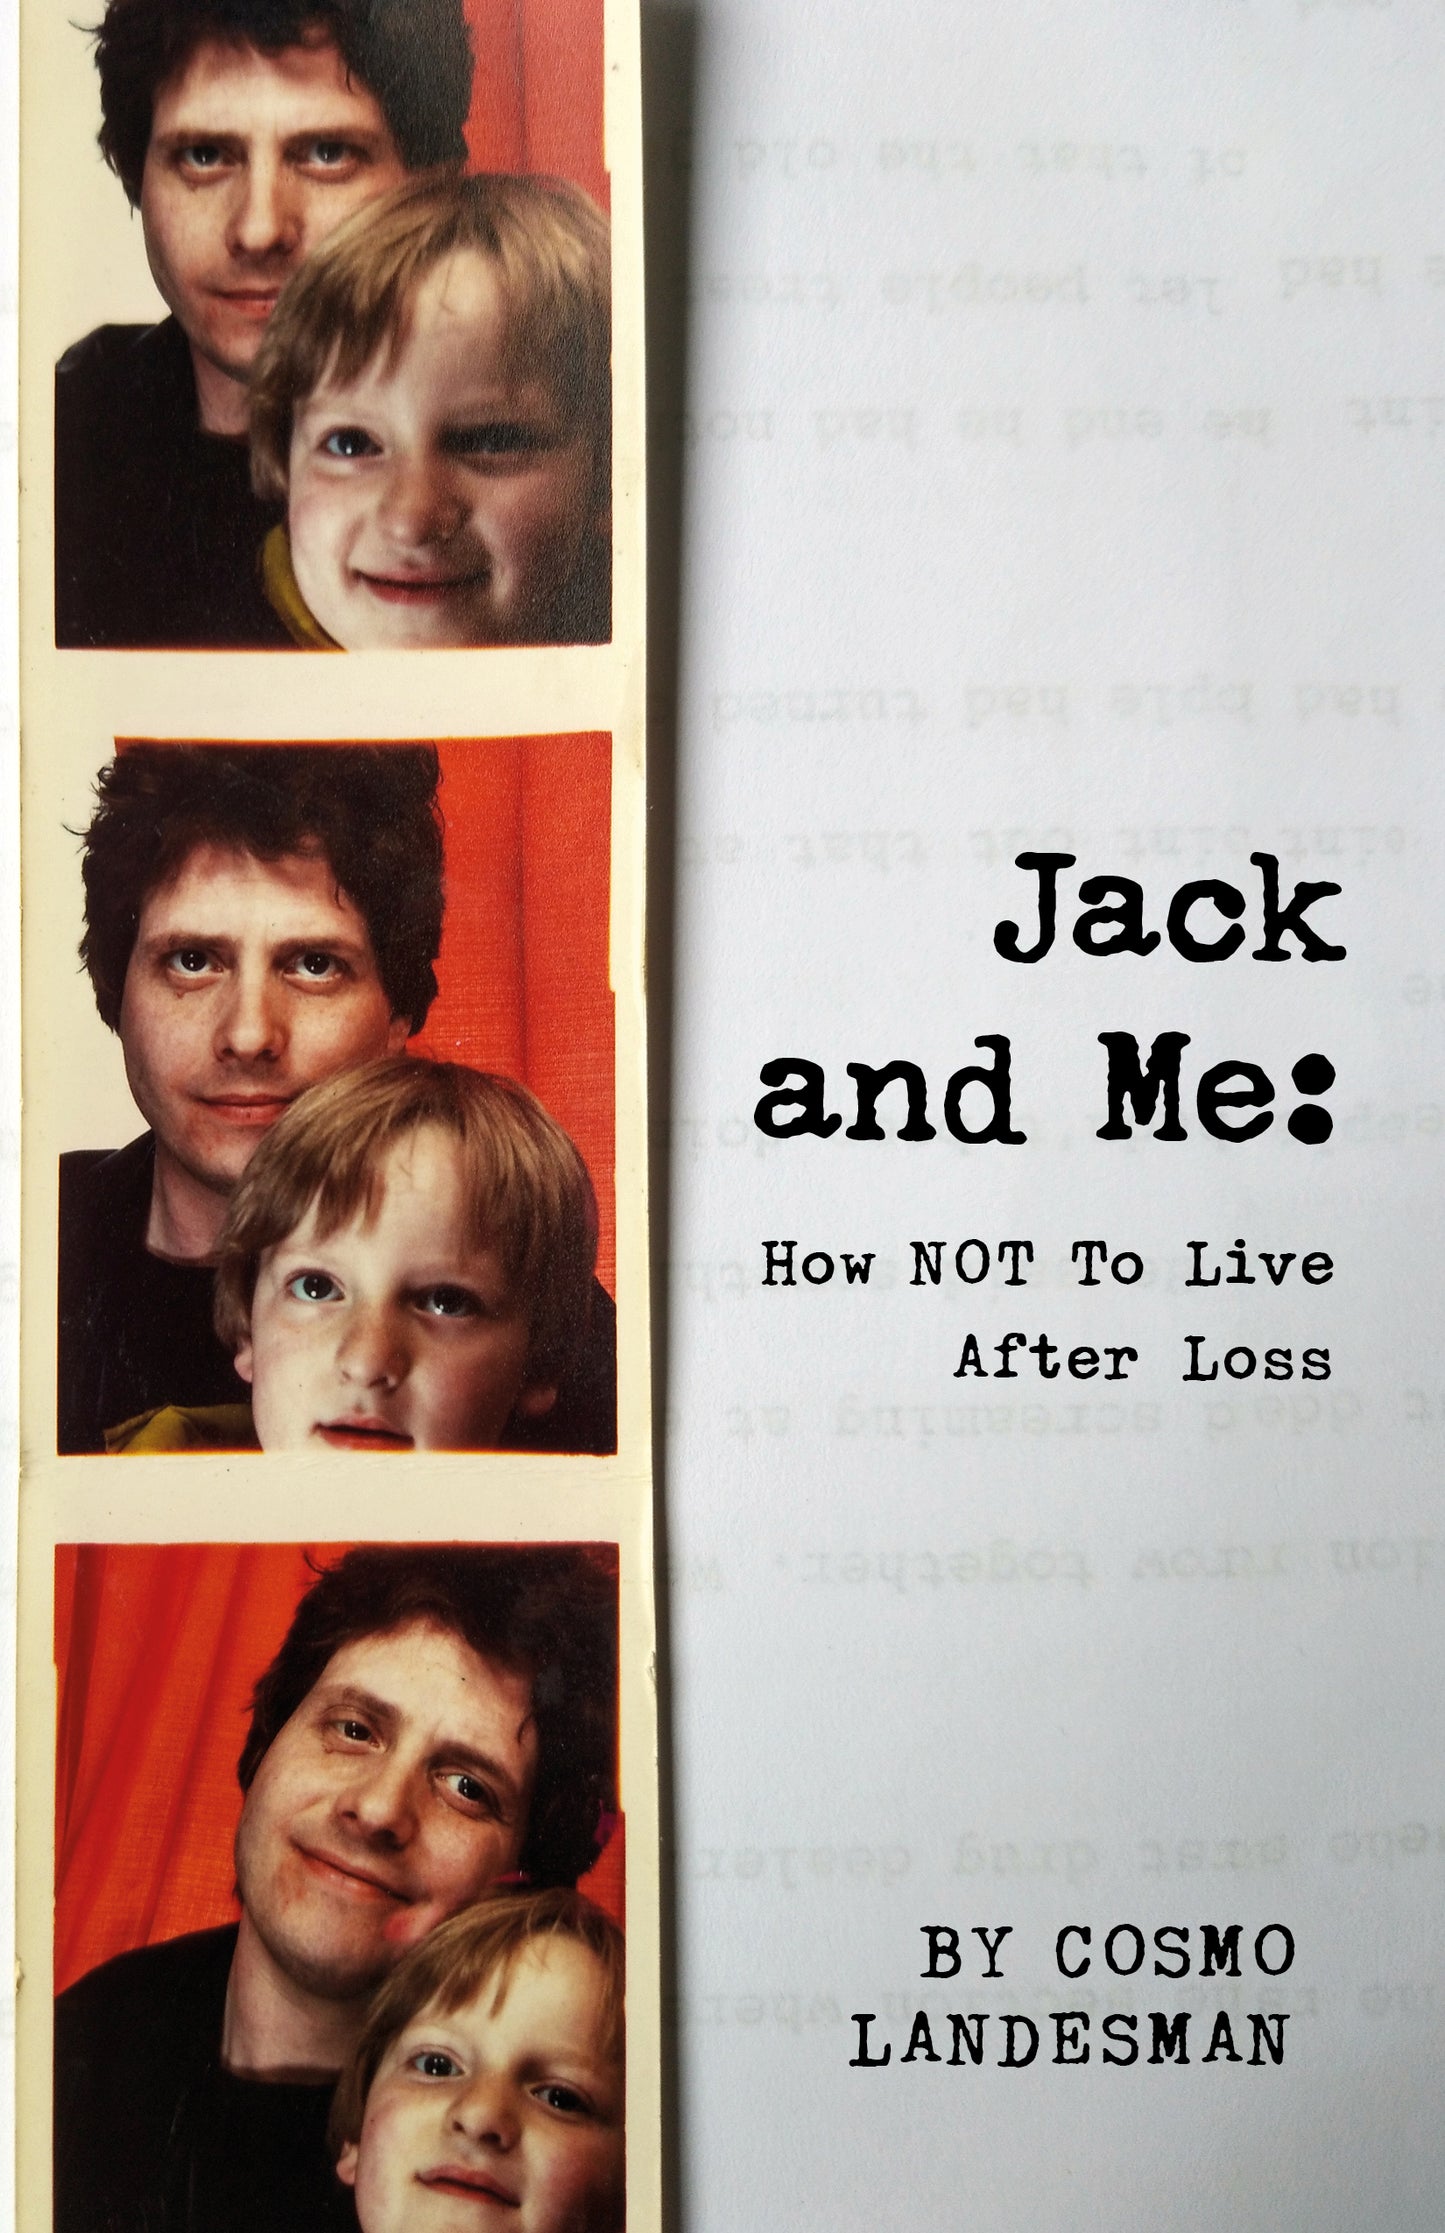 JACK AND ME: HOW NOT TO LIVE AFTER LOSS